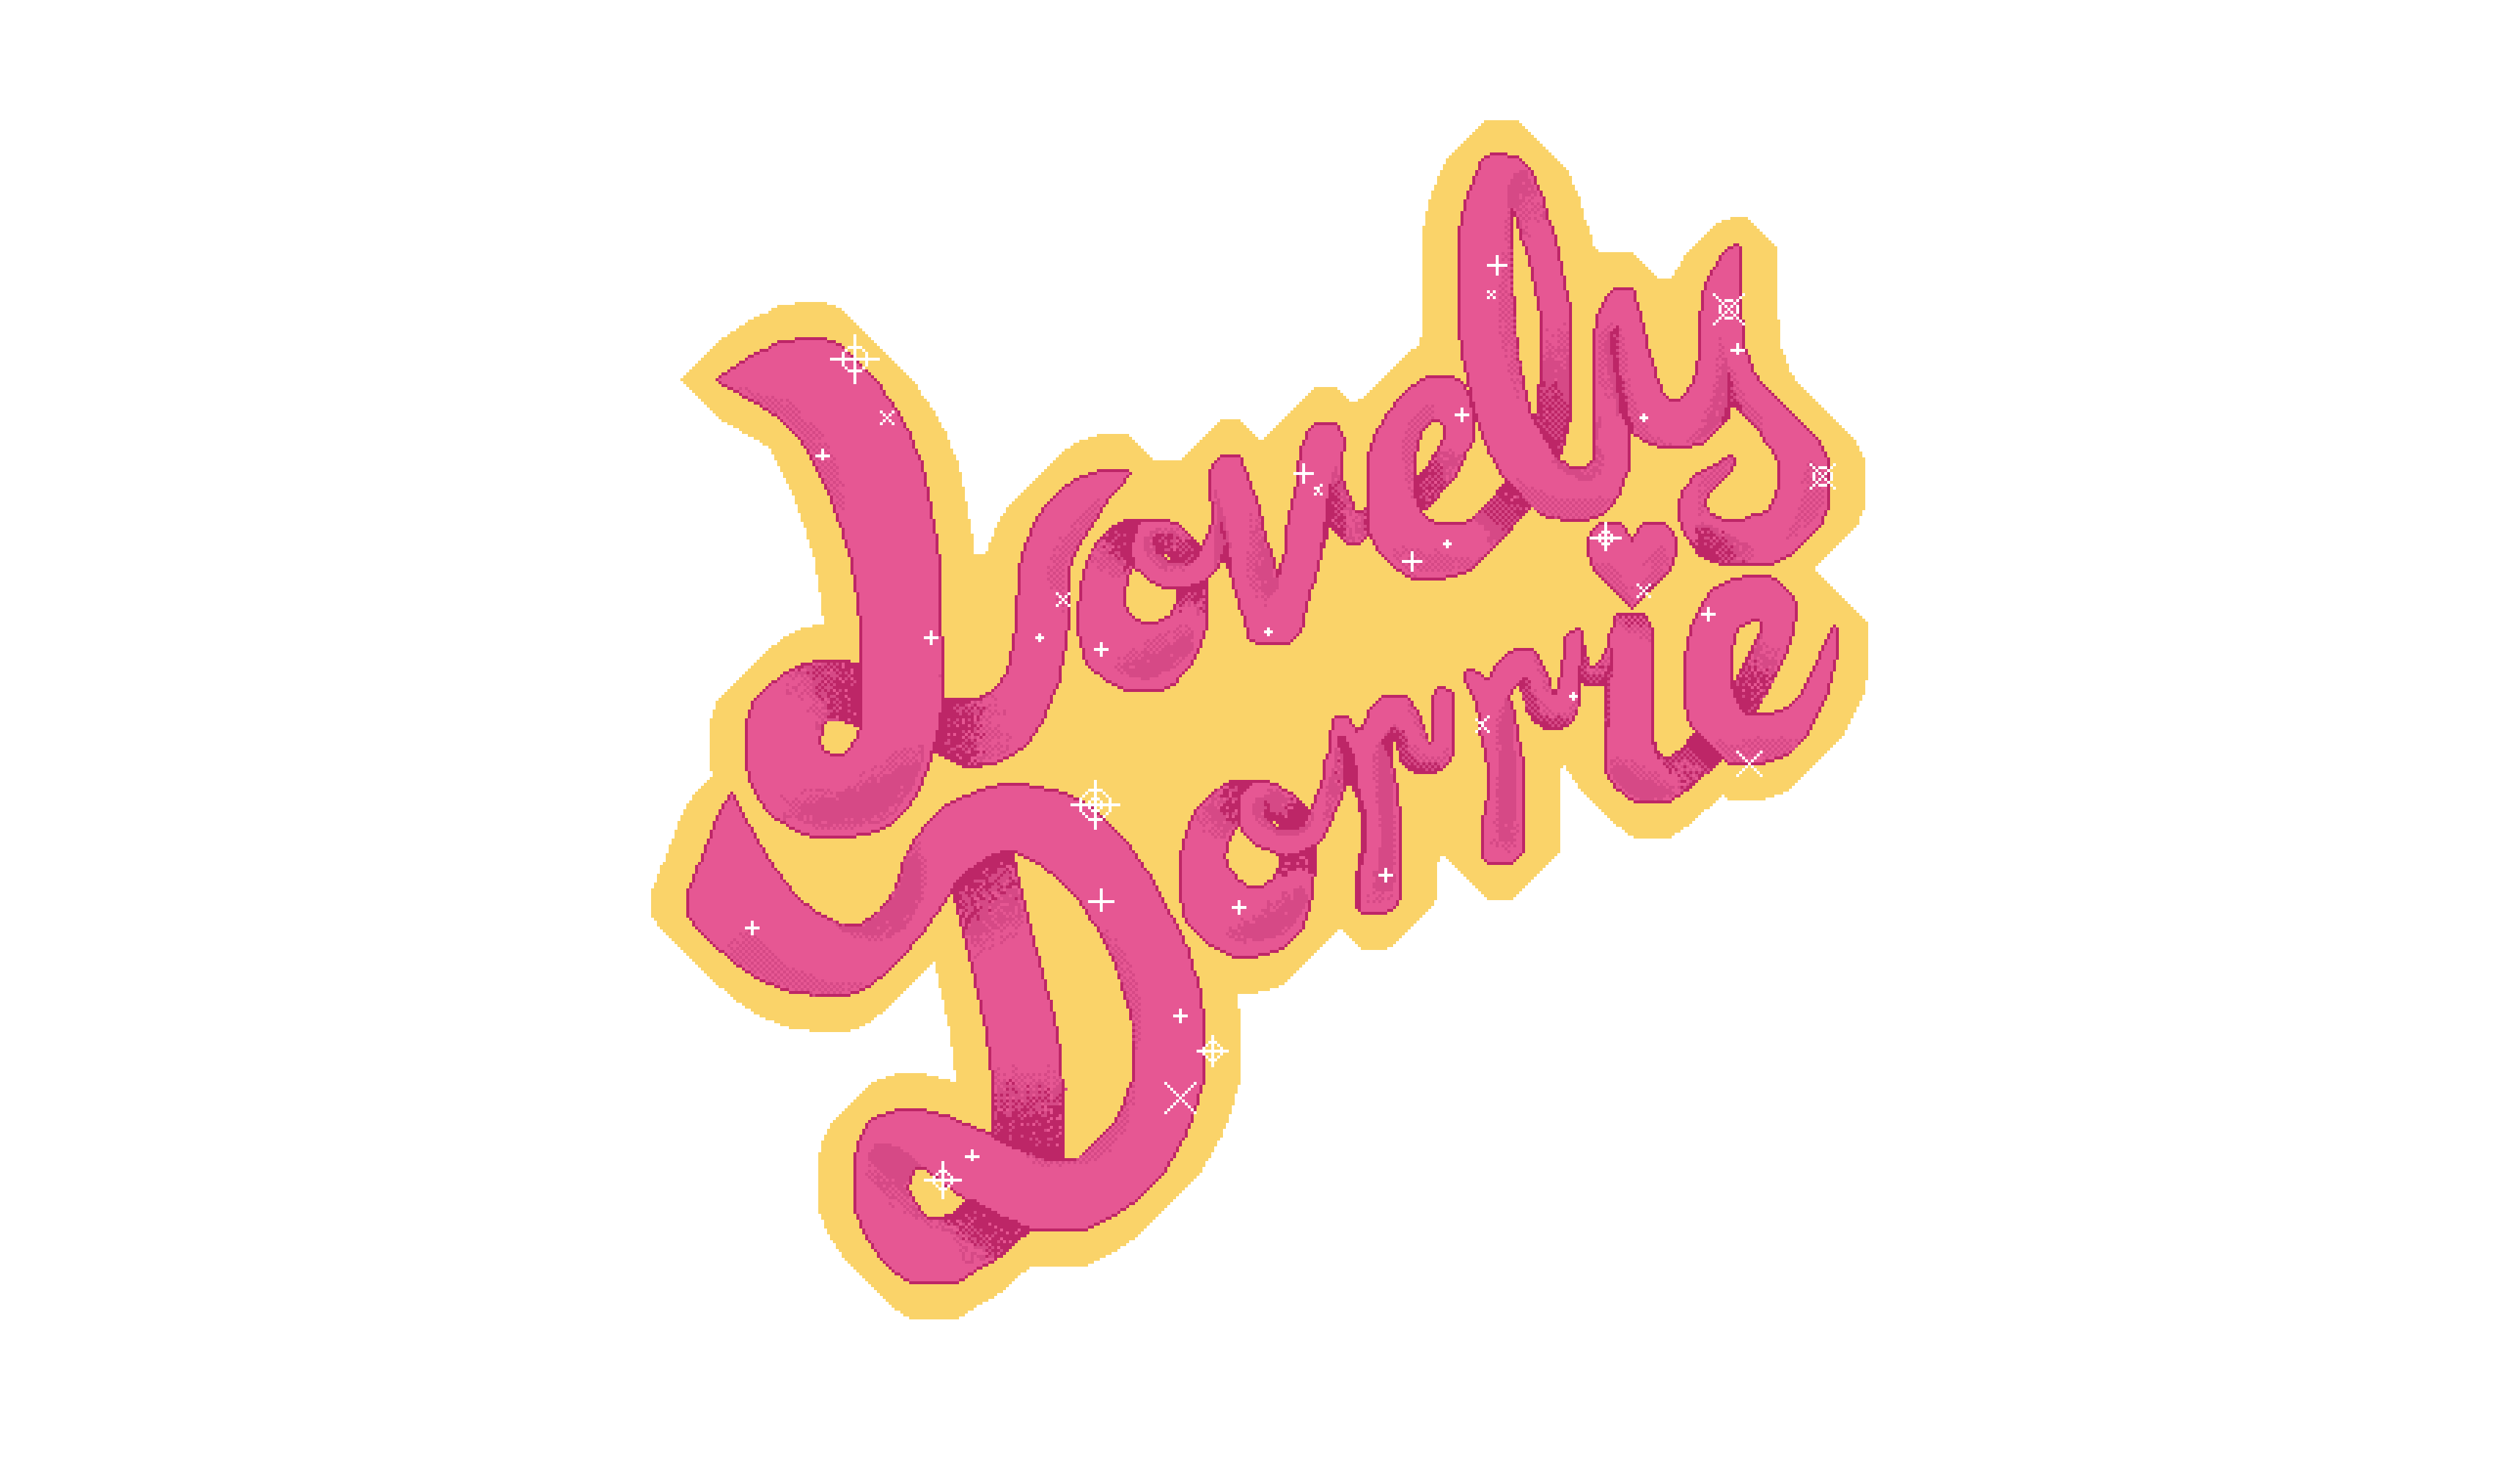 Rounded script logo reading 'LovelyDorrie' in pink with a yellow and white outline bouncing up and down on pink background with a darker pink repeating hearts and broken hearts pattern.